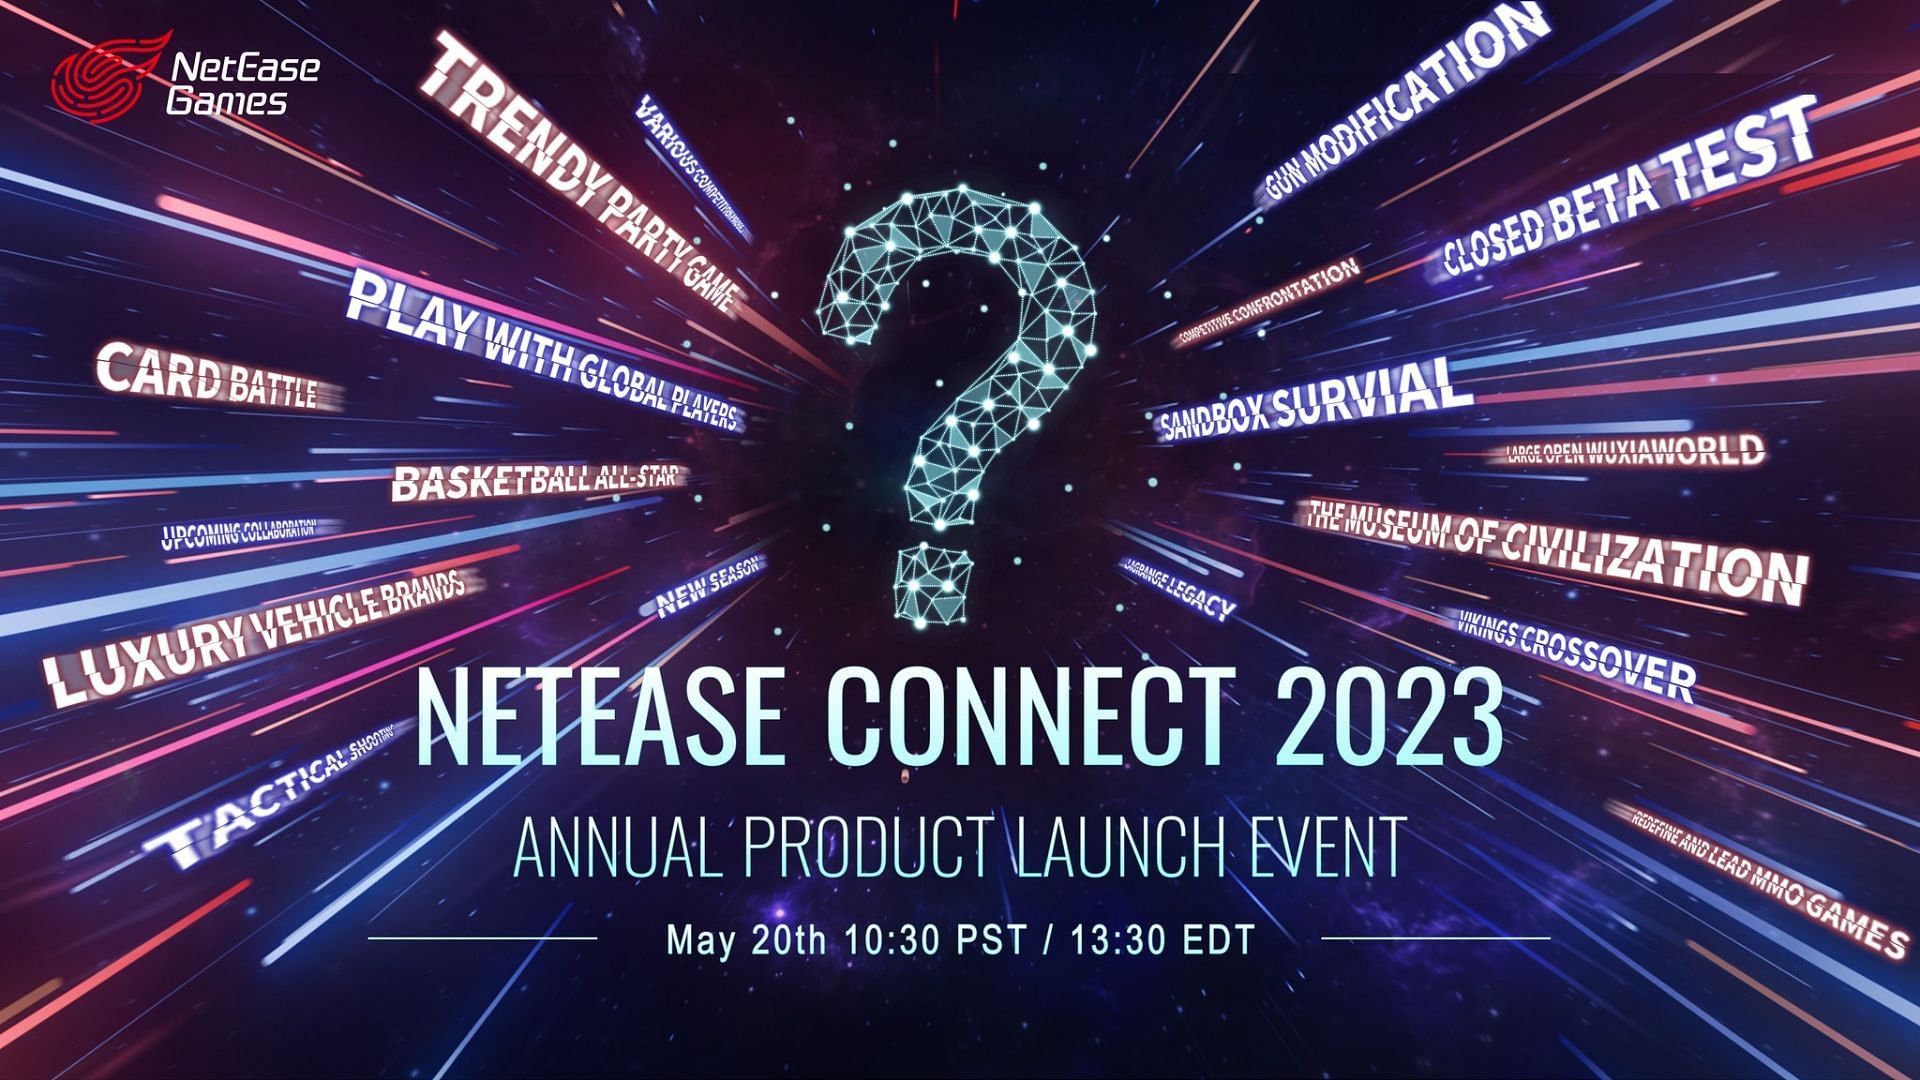 NetEase Connect 2023 Event dates, how to watch, and more